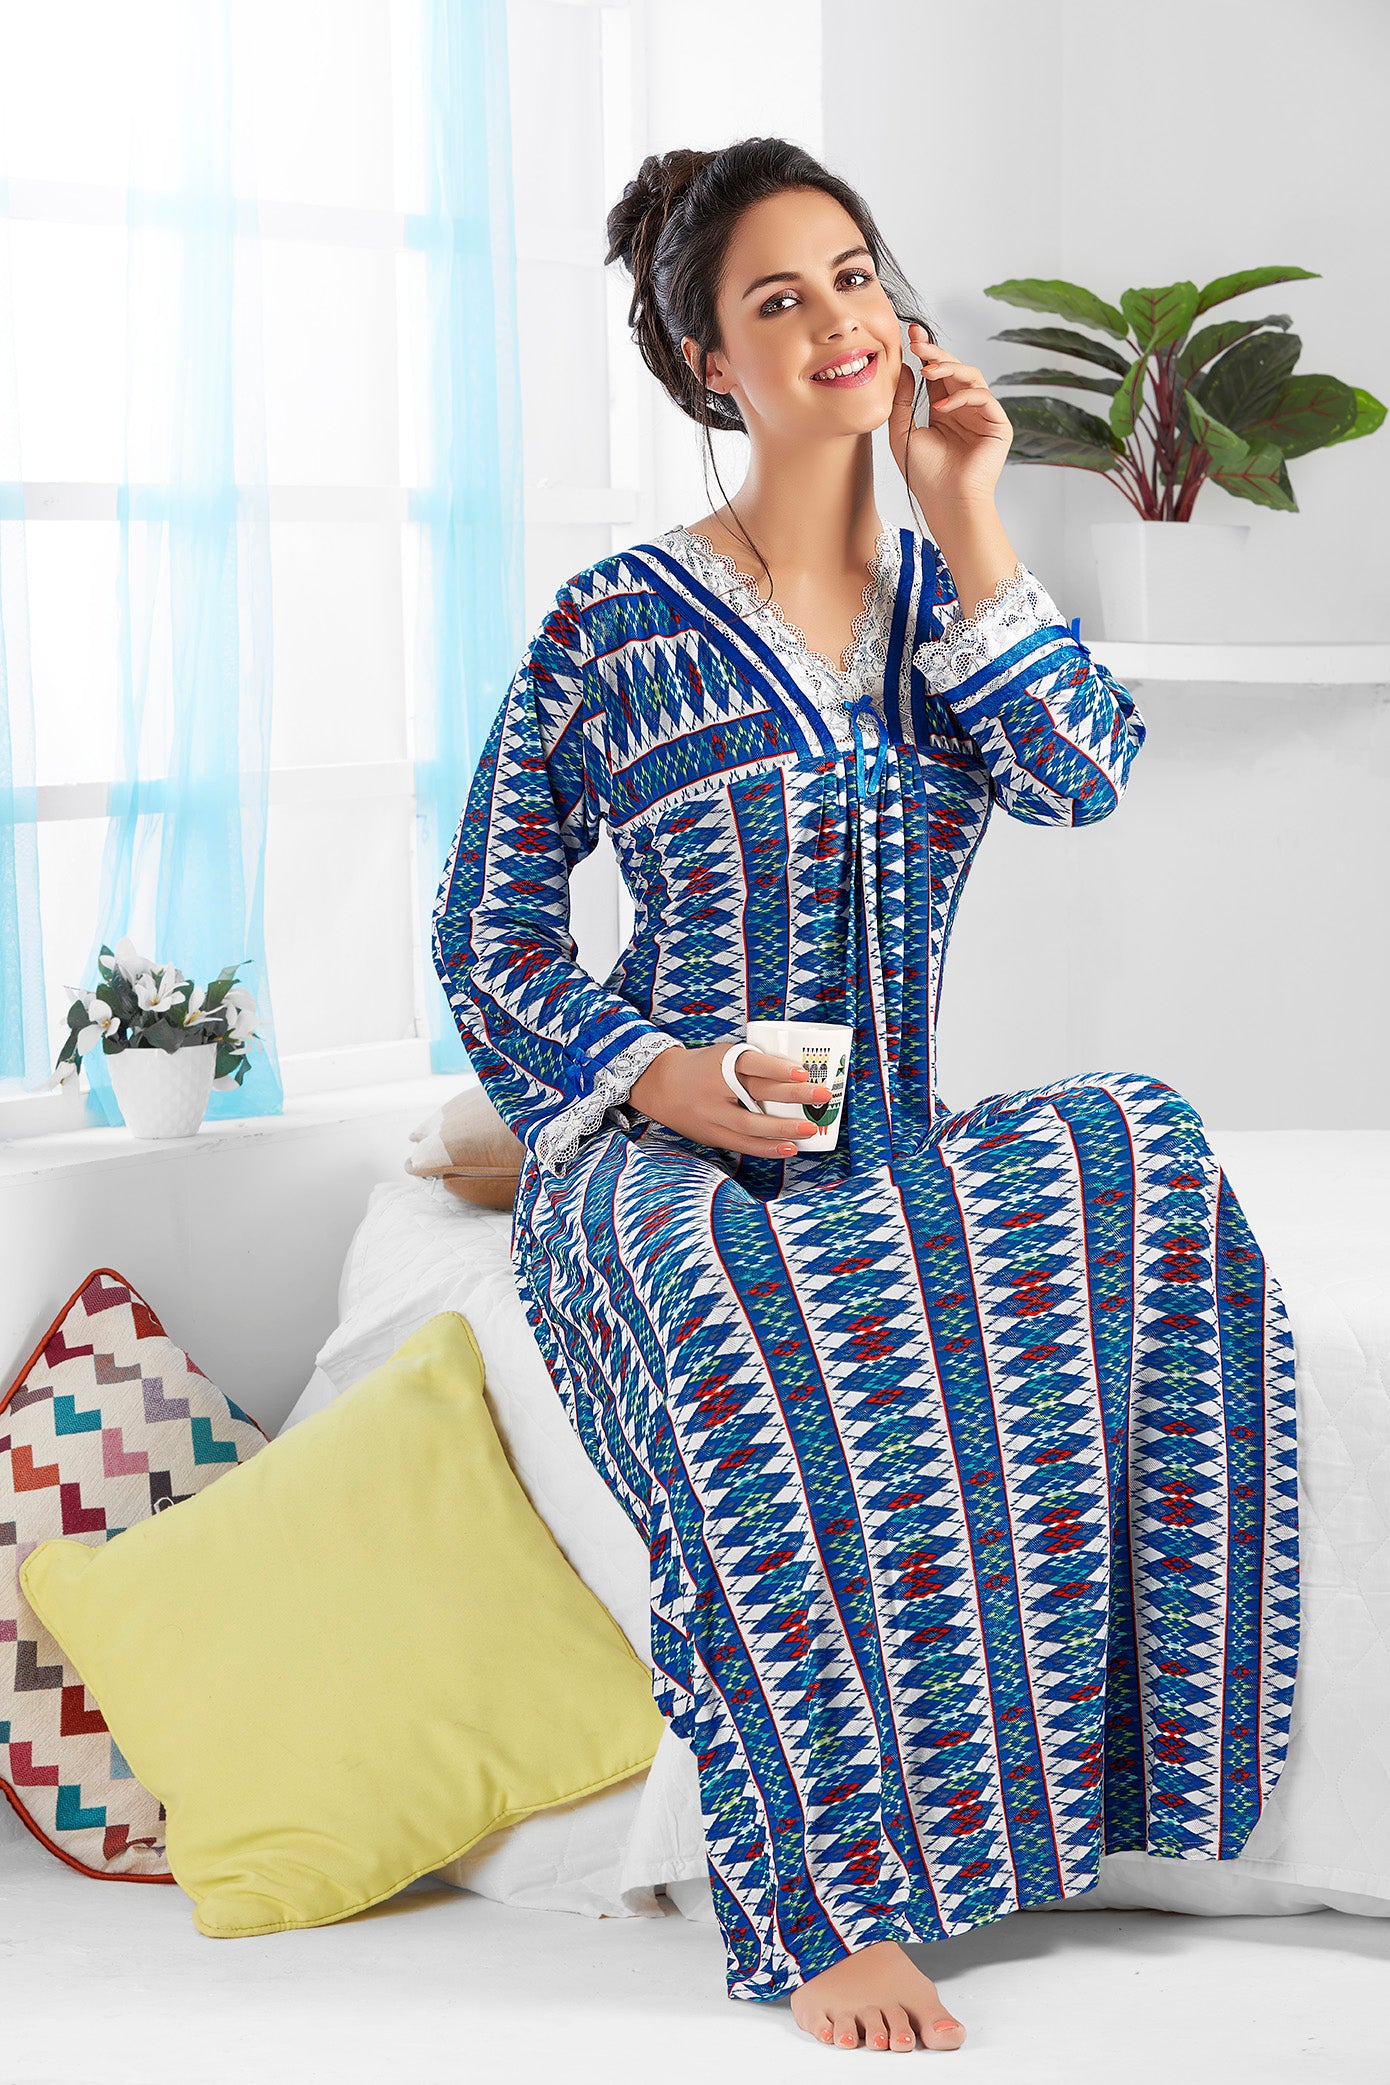 Skkinvalue's soft & silky Lycra fabric Long sleeves Printed Maxi